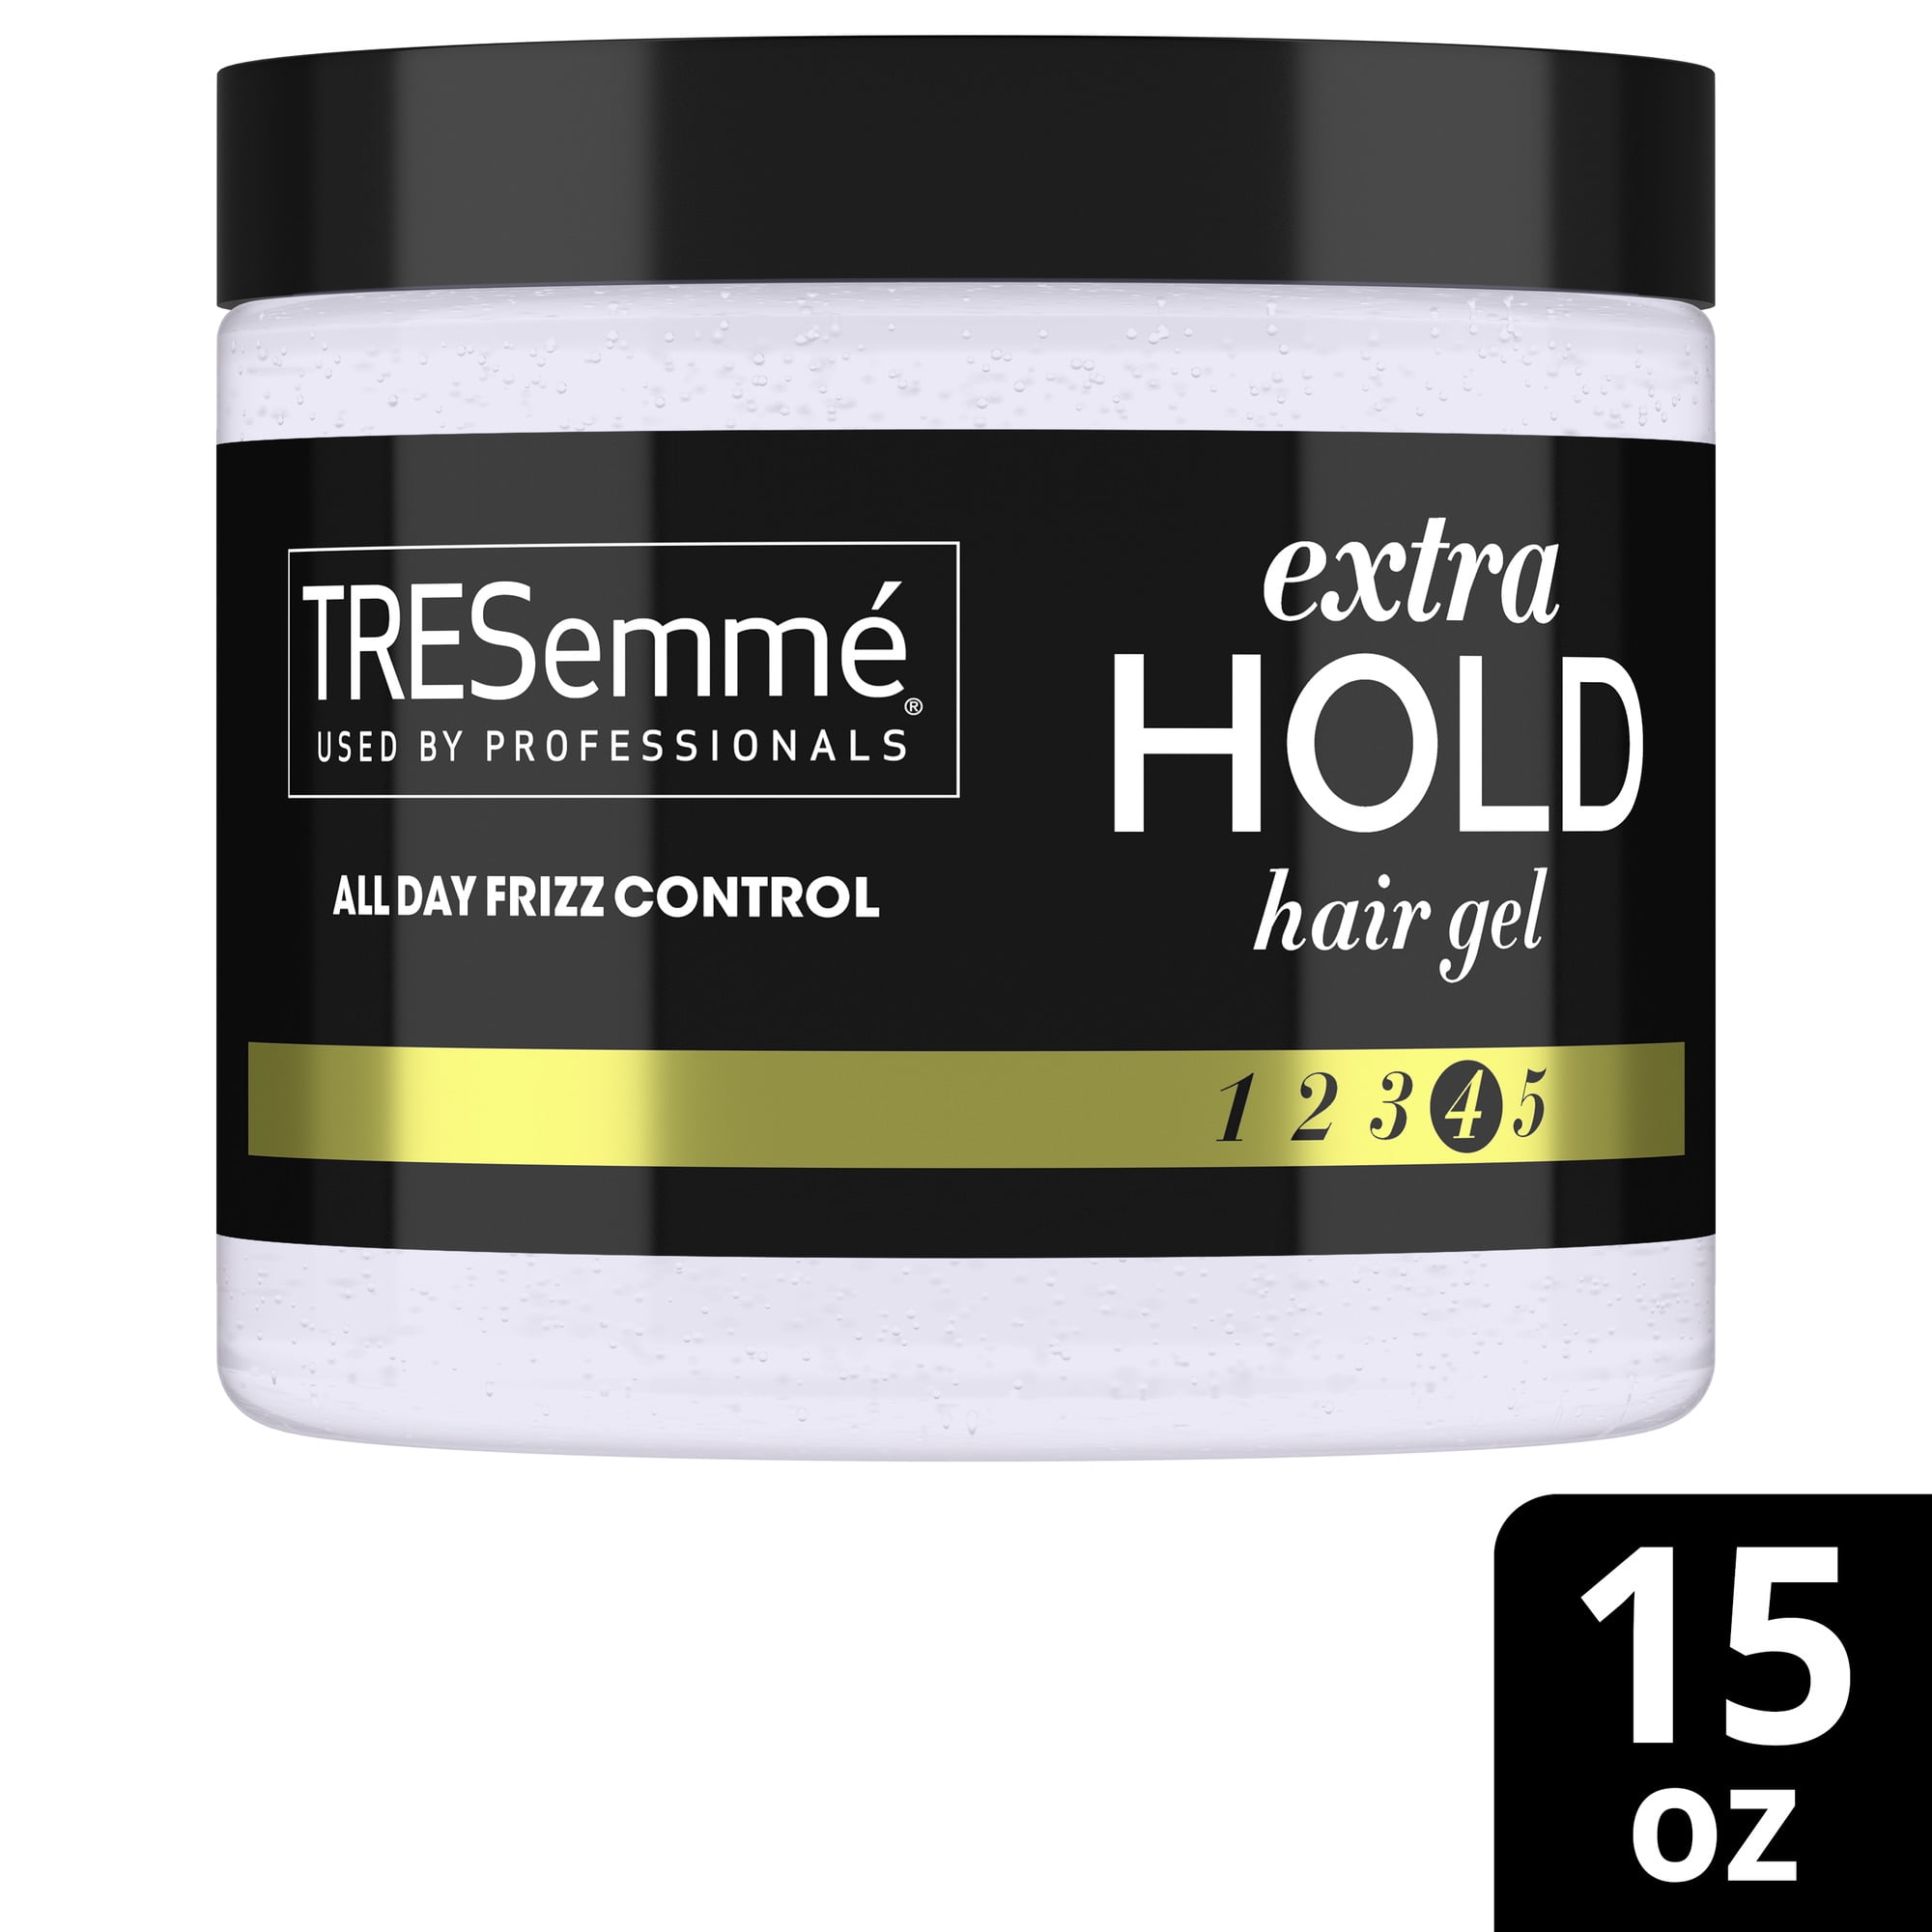 Tresemme Used by Professionals Frizz Control Humidity Resistant Extra Hold  Jar Hair Styling Gel, 15 oz 